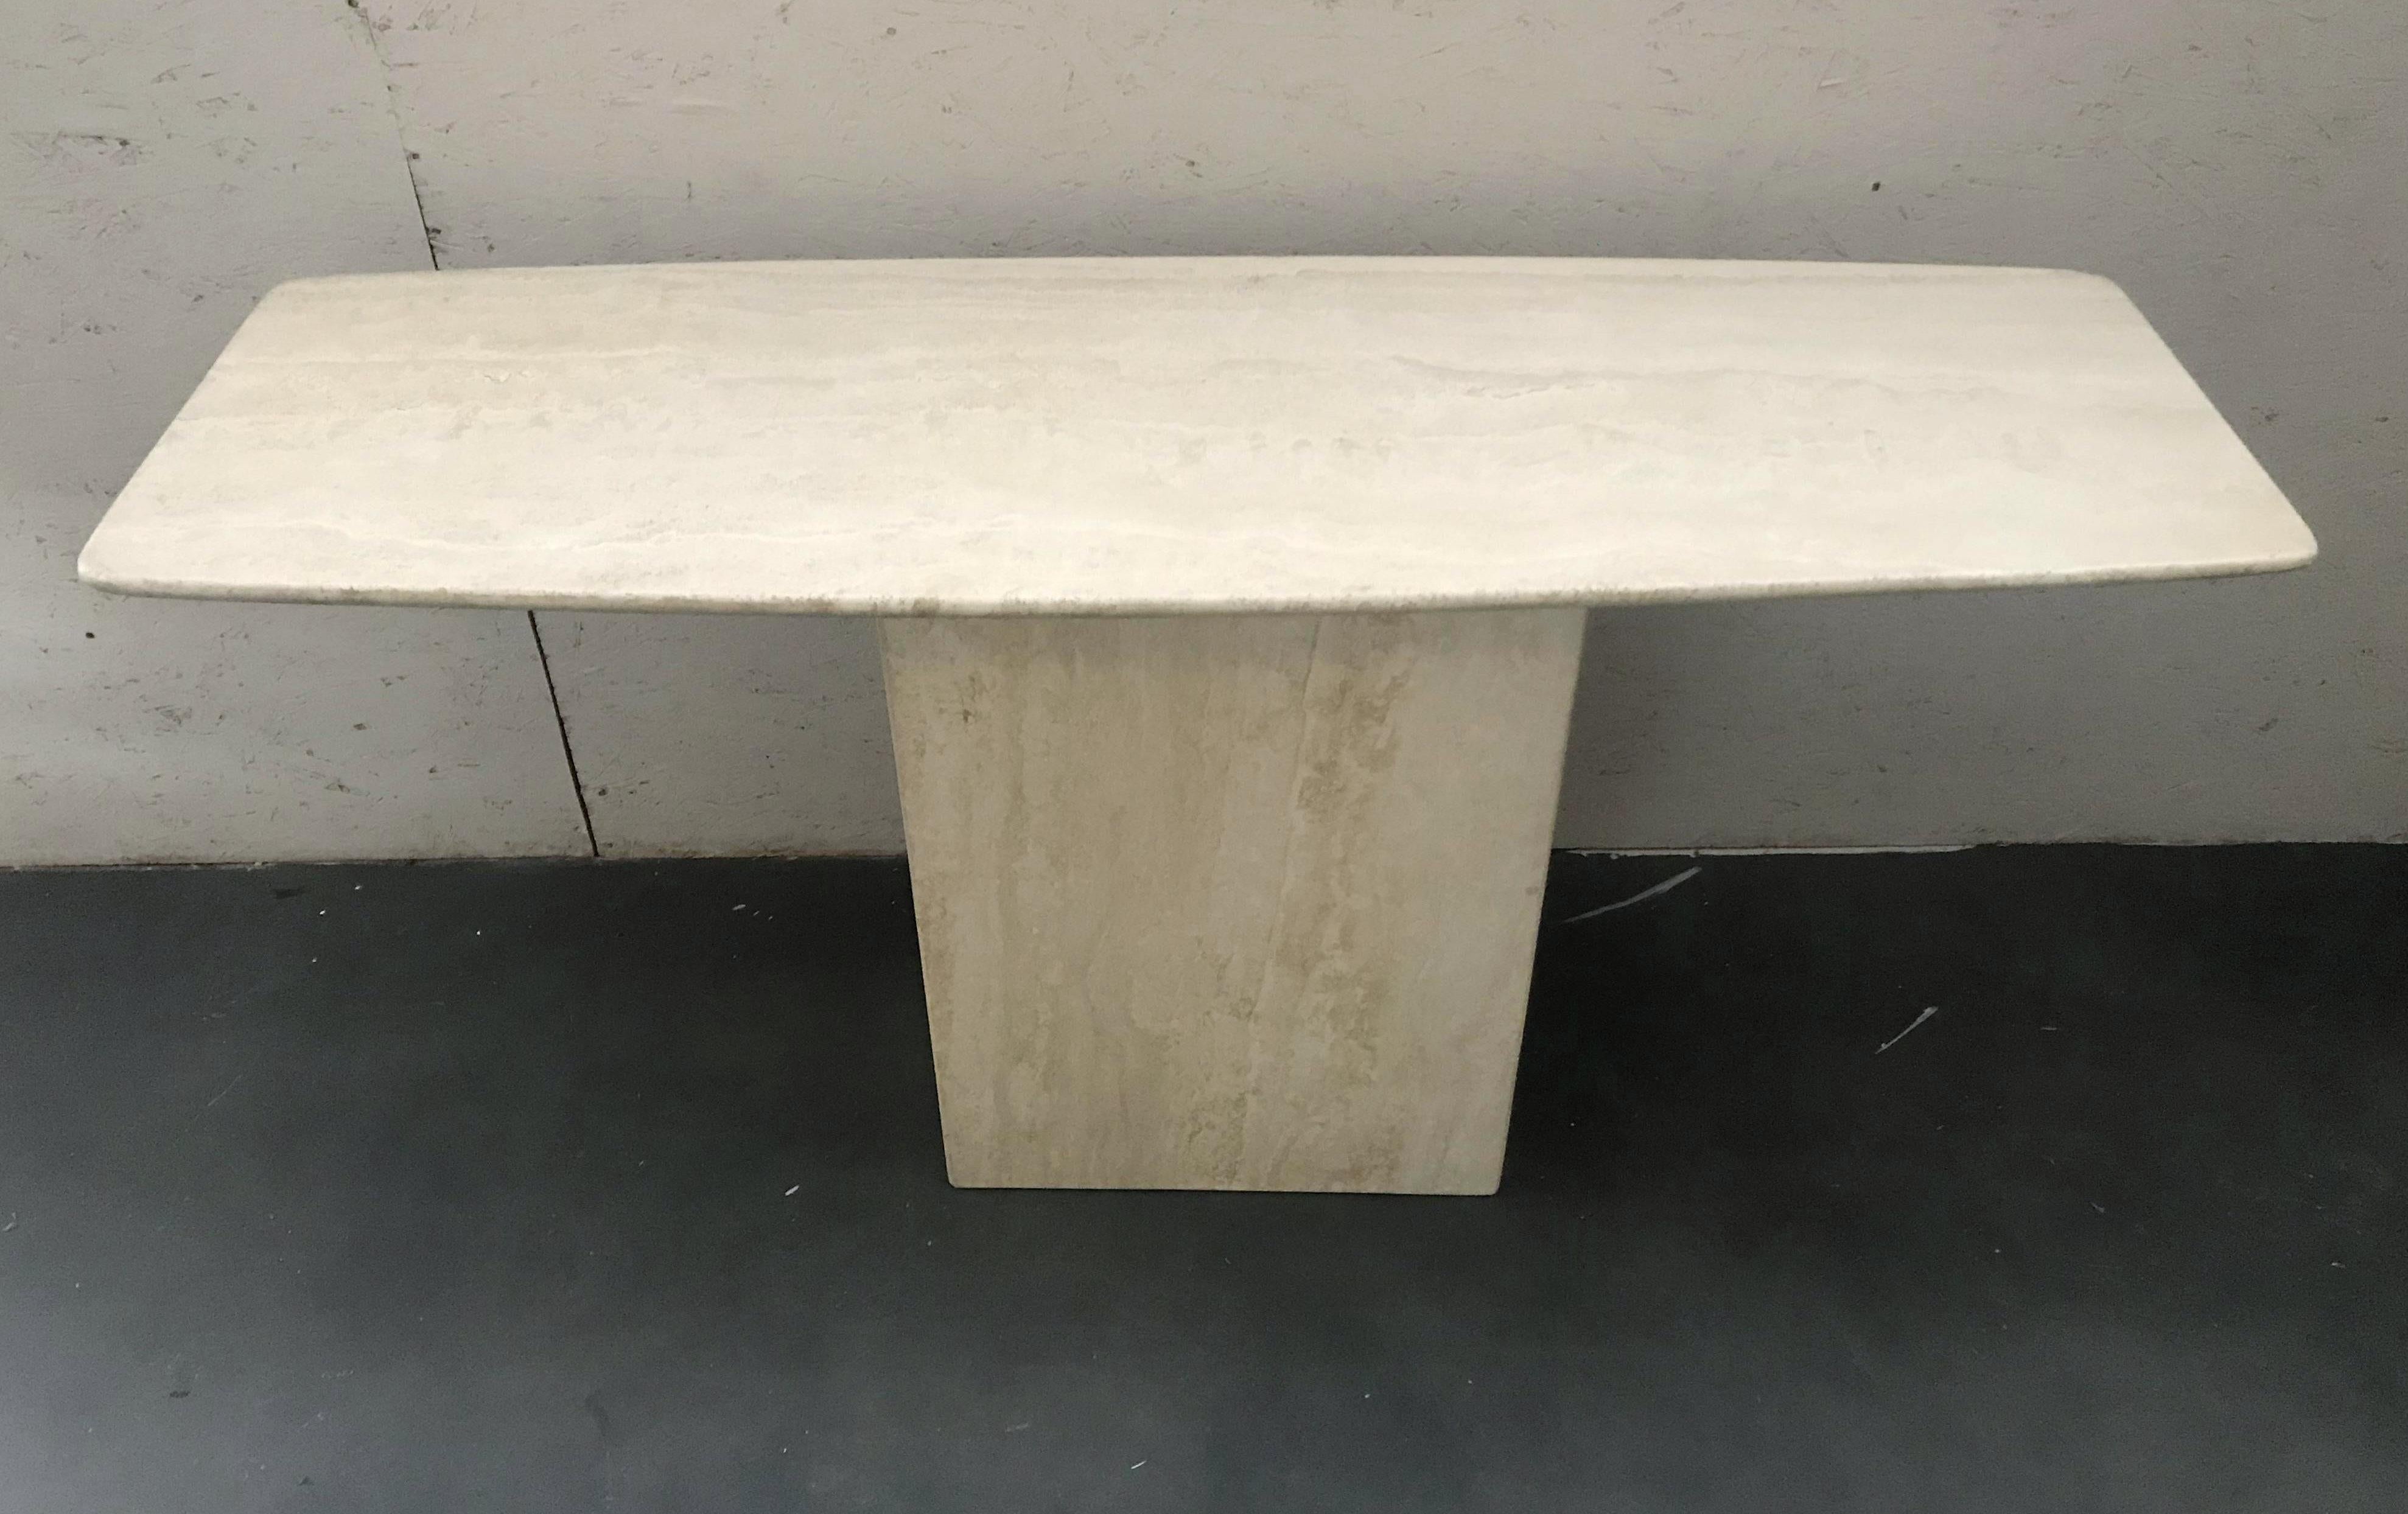 Vintage midcentury travertine limestone console table with rounded rectangular top supported by a single pedestal base / Made in Italy, circa 1970s
Measures: Width 59 inches, depth 19.5 inches, height 29 inches
1 available in stock in Palm Springs